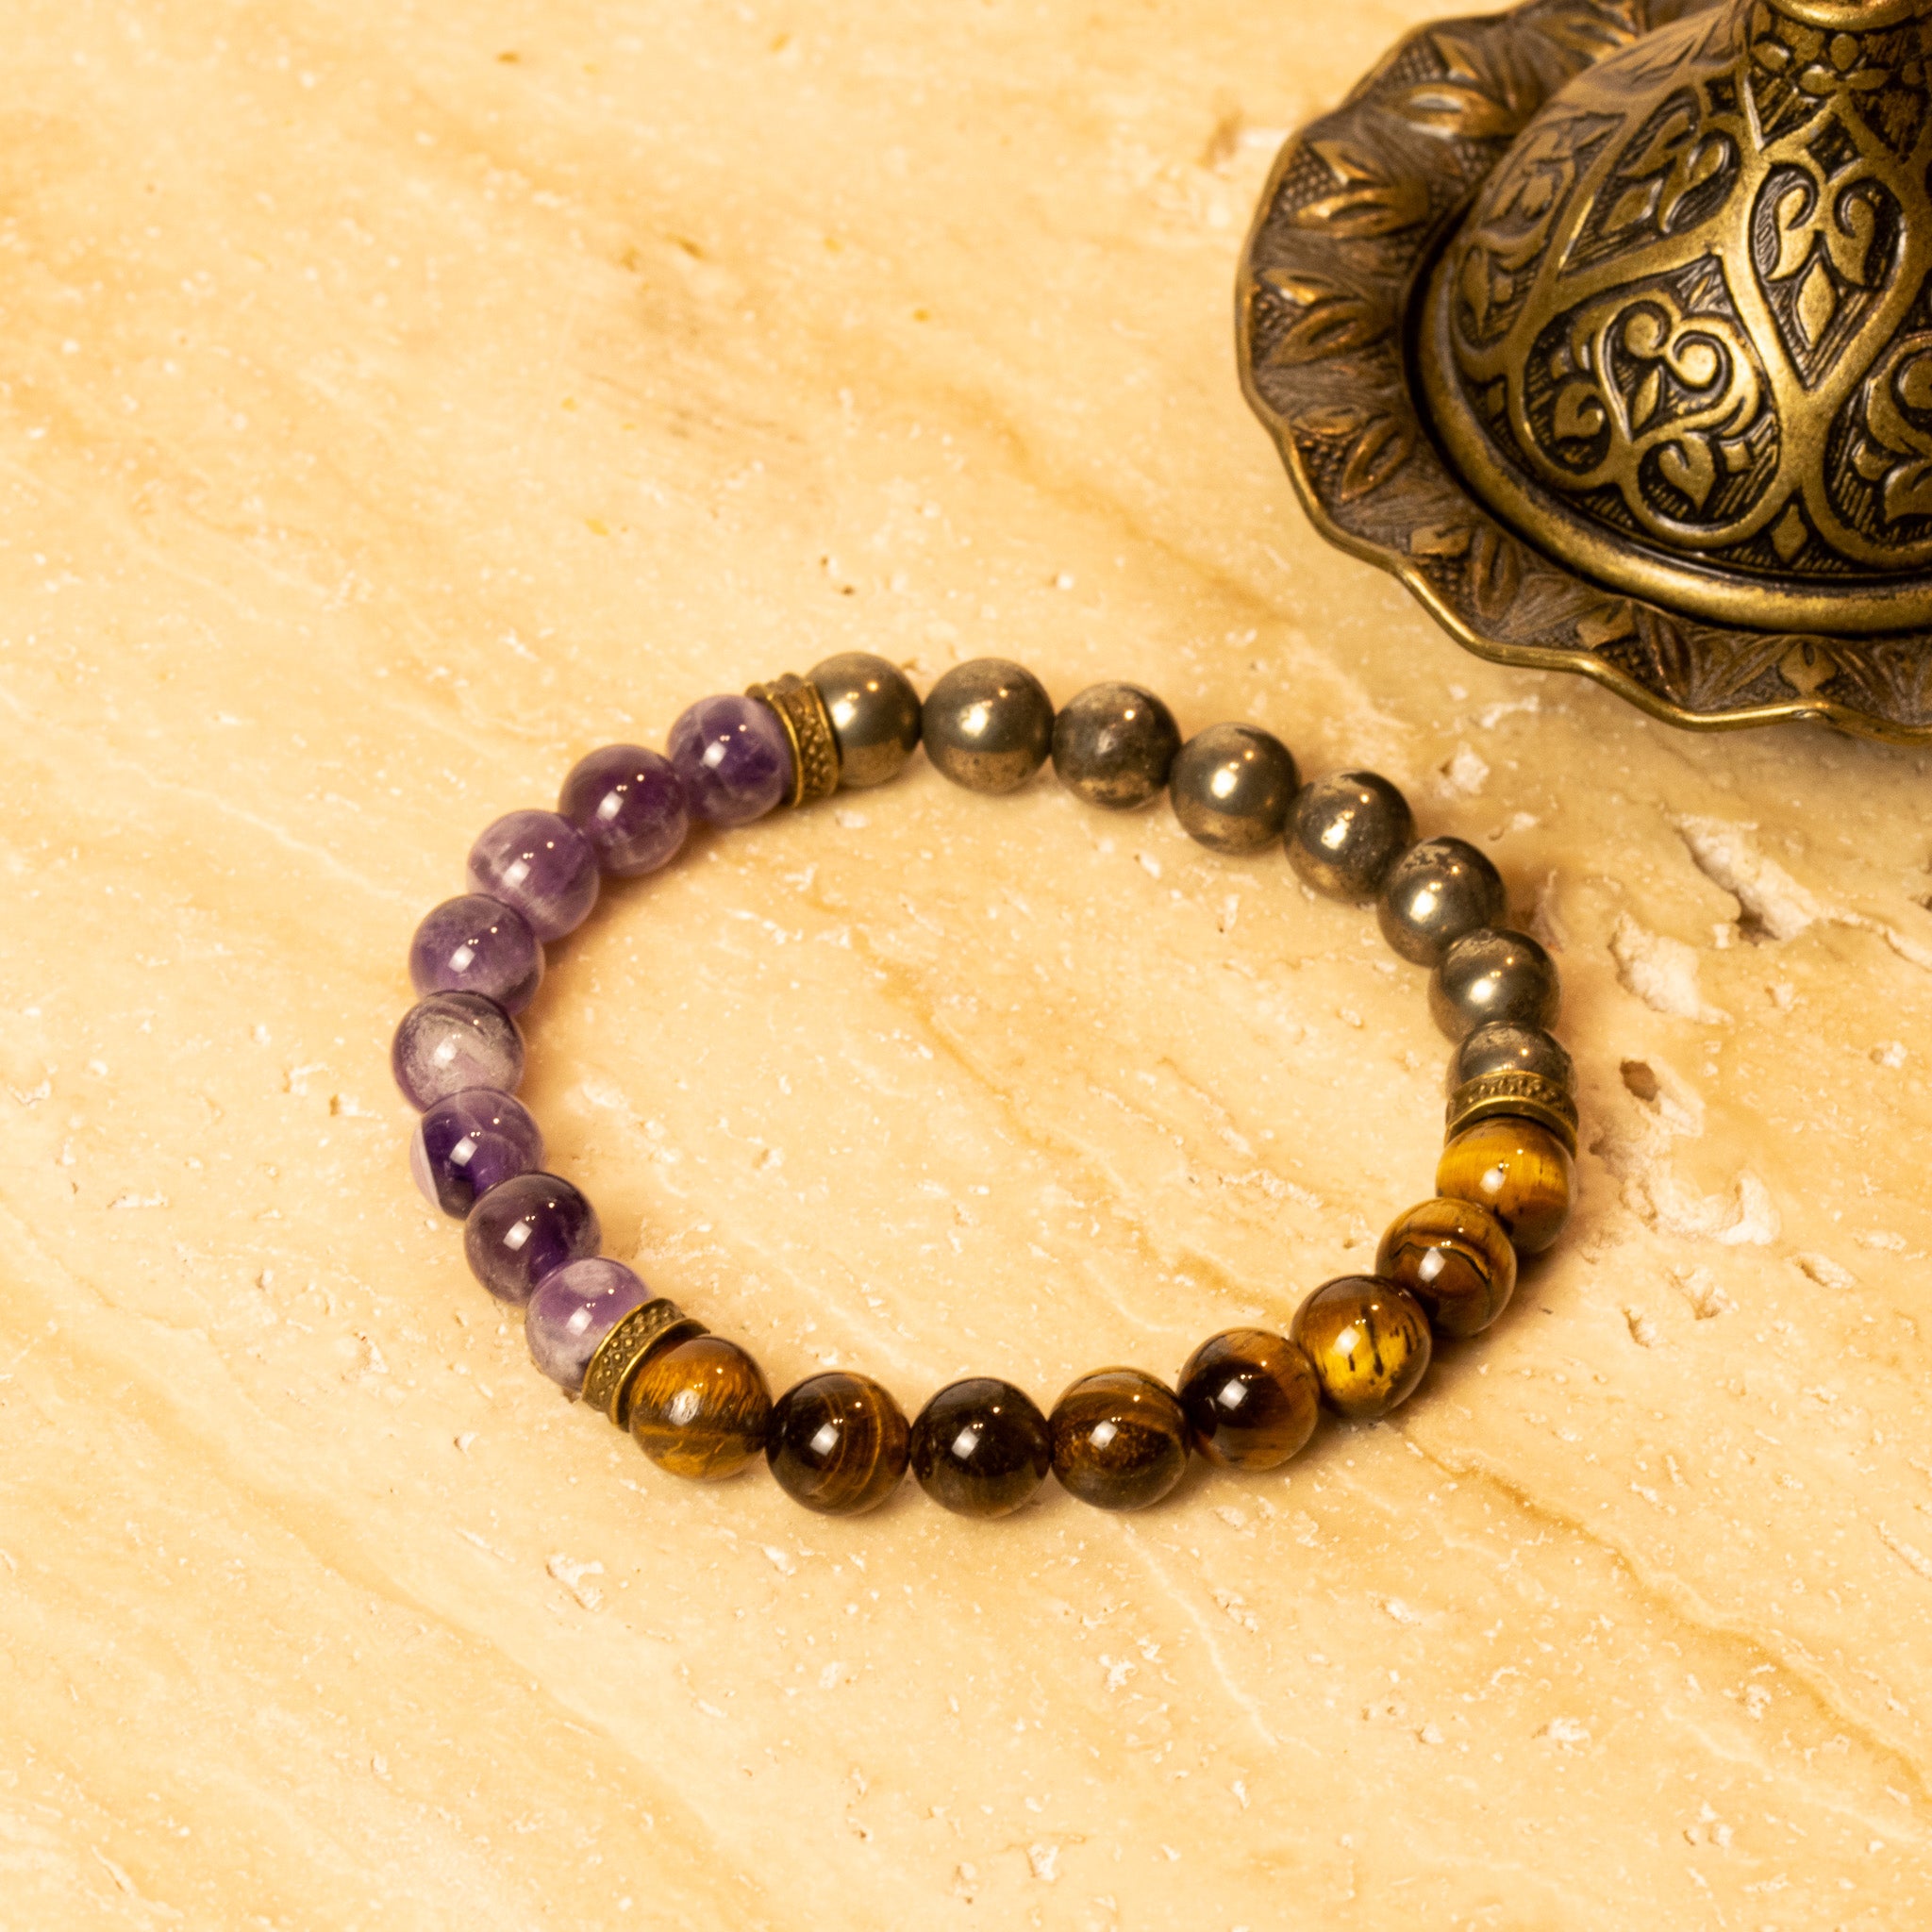 Amethyst Tiger Eye and Pyrite Bracelet for focus, results, wealth & grounding